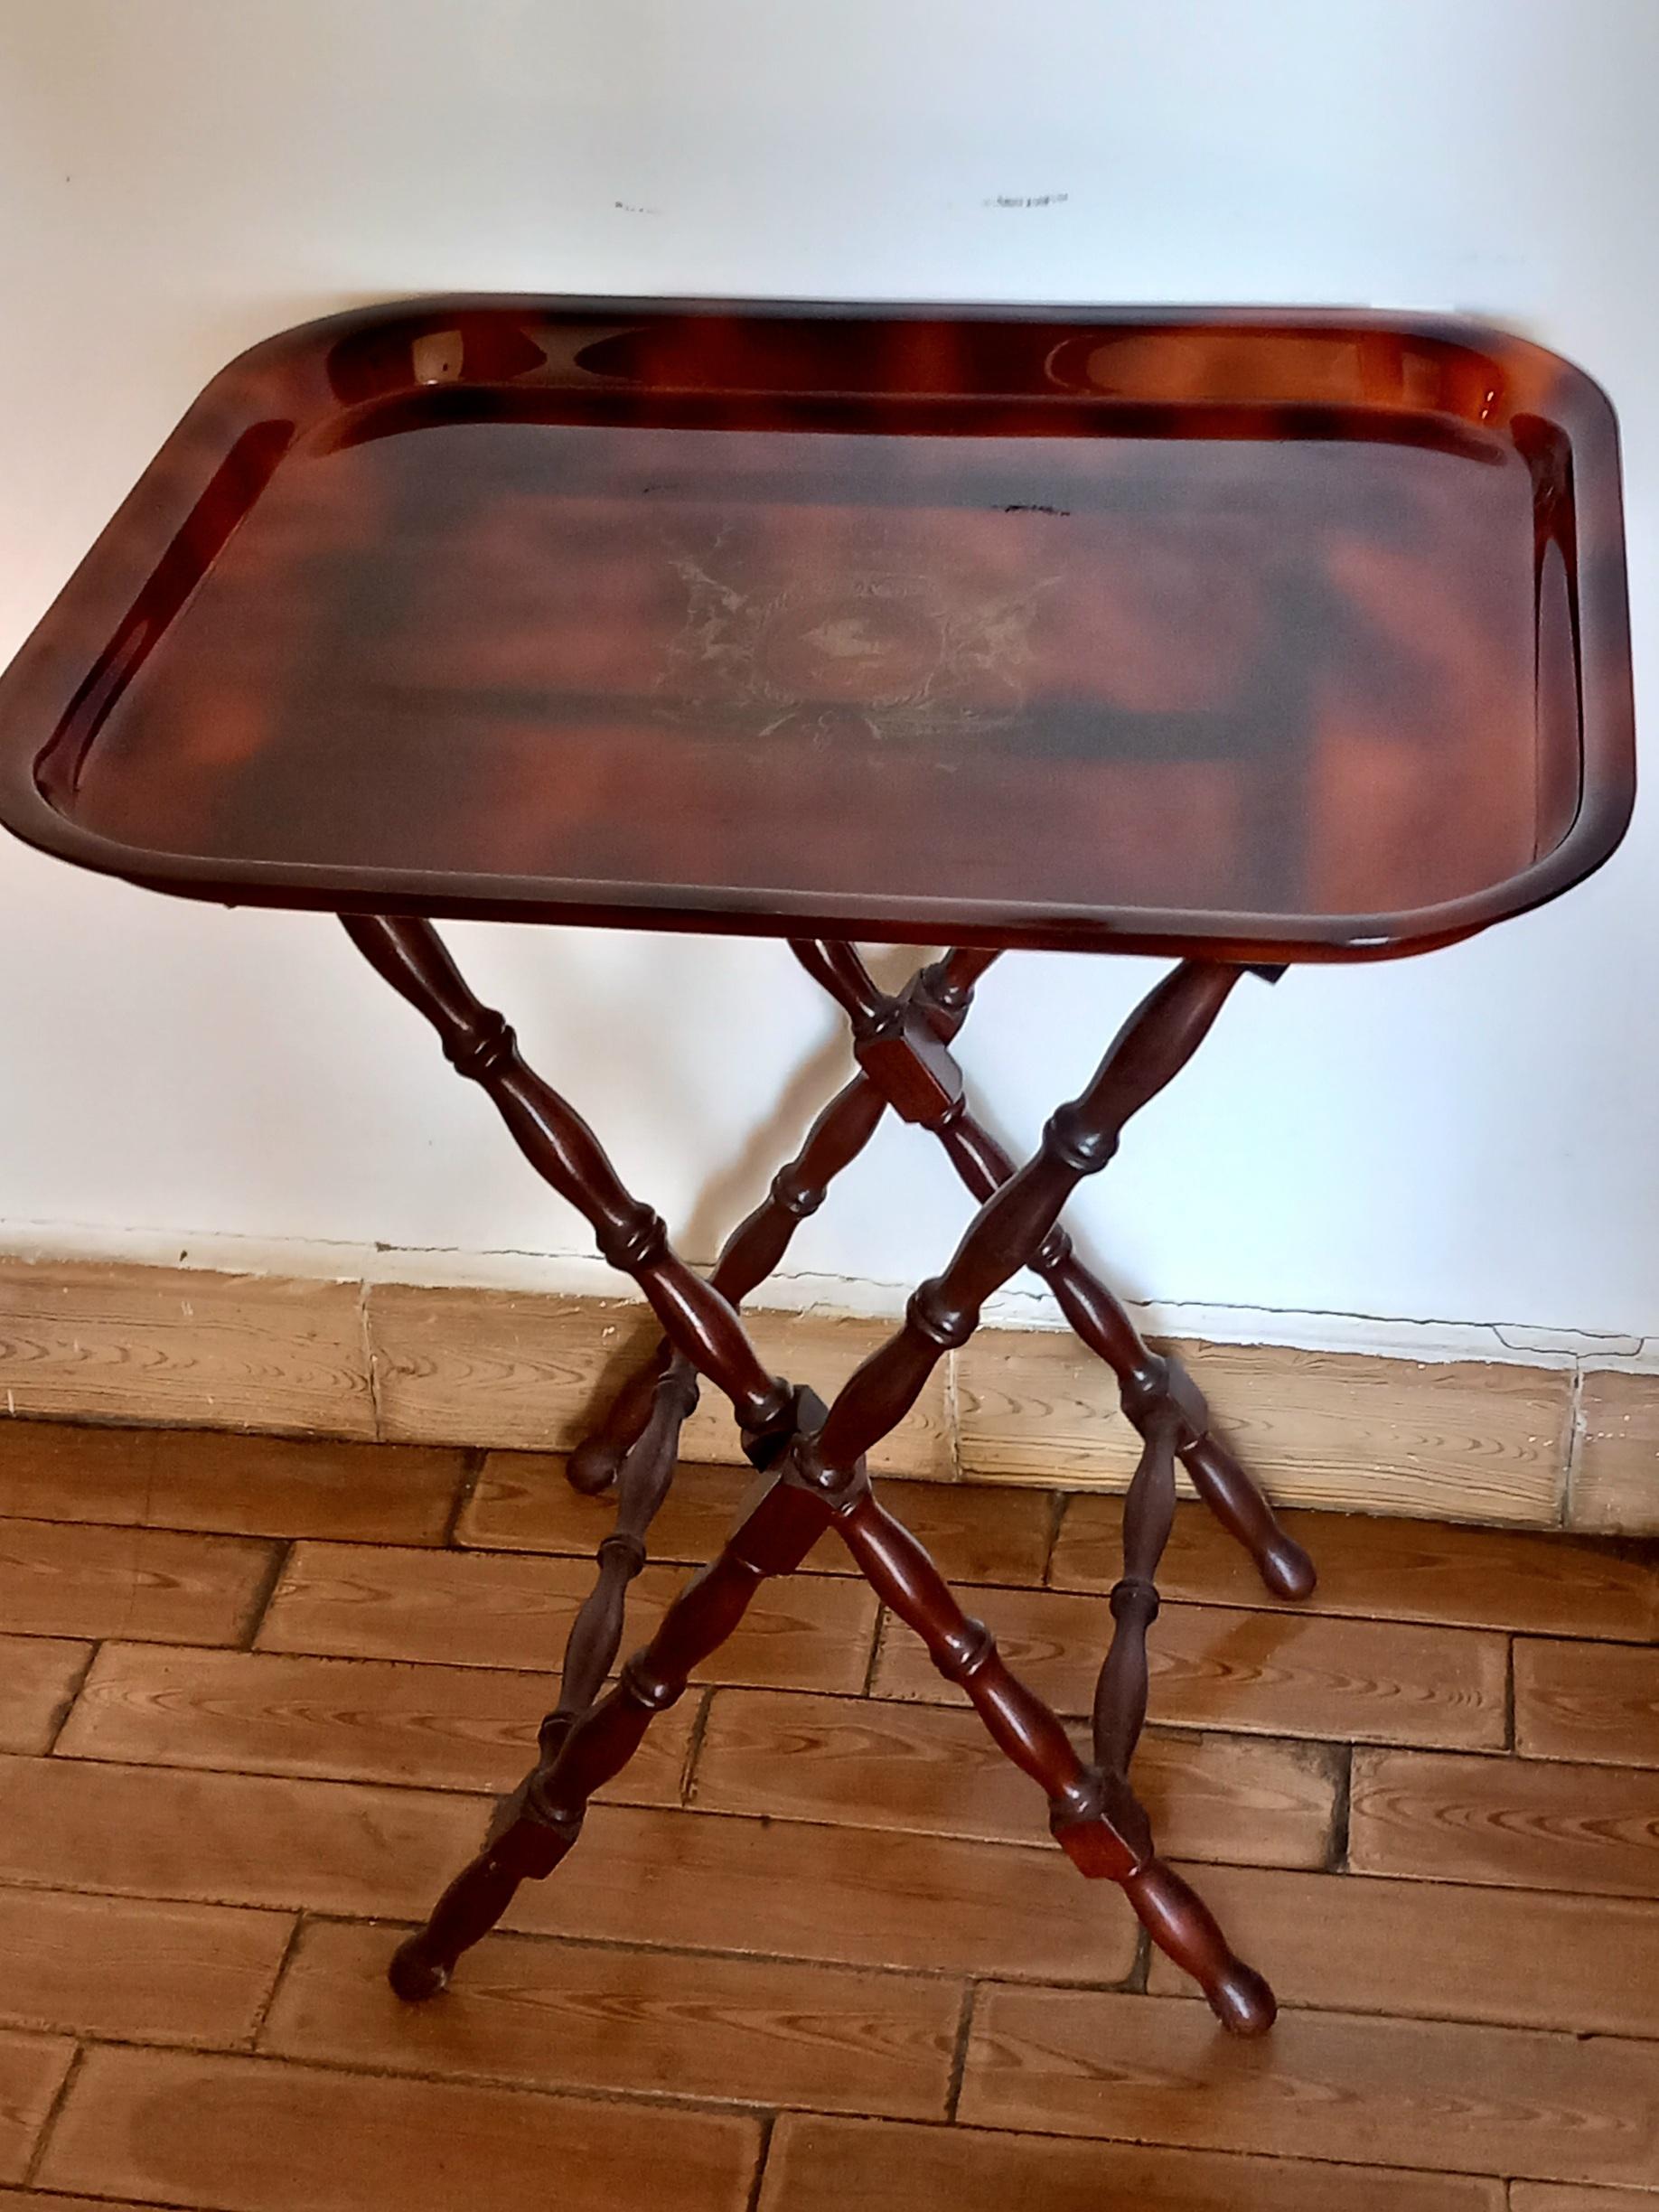 Tray Methacrylate Turtle Shell Design, with Folding Legs Valenti Barcelona For Sale 2